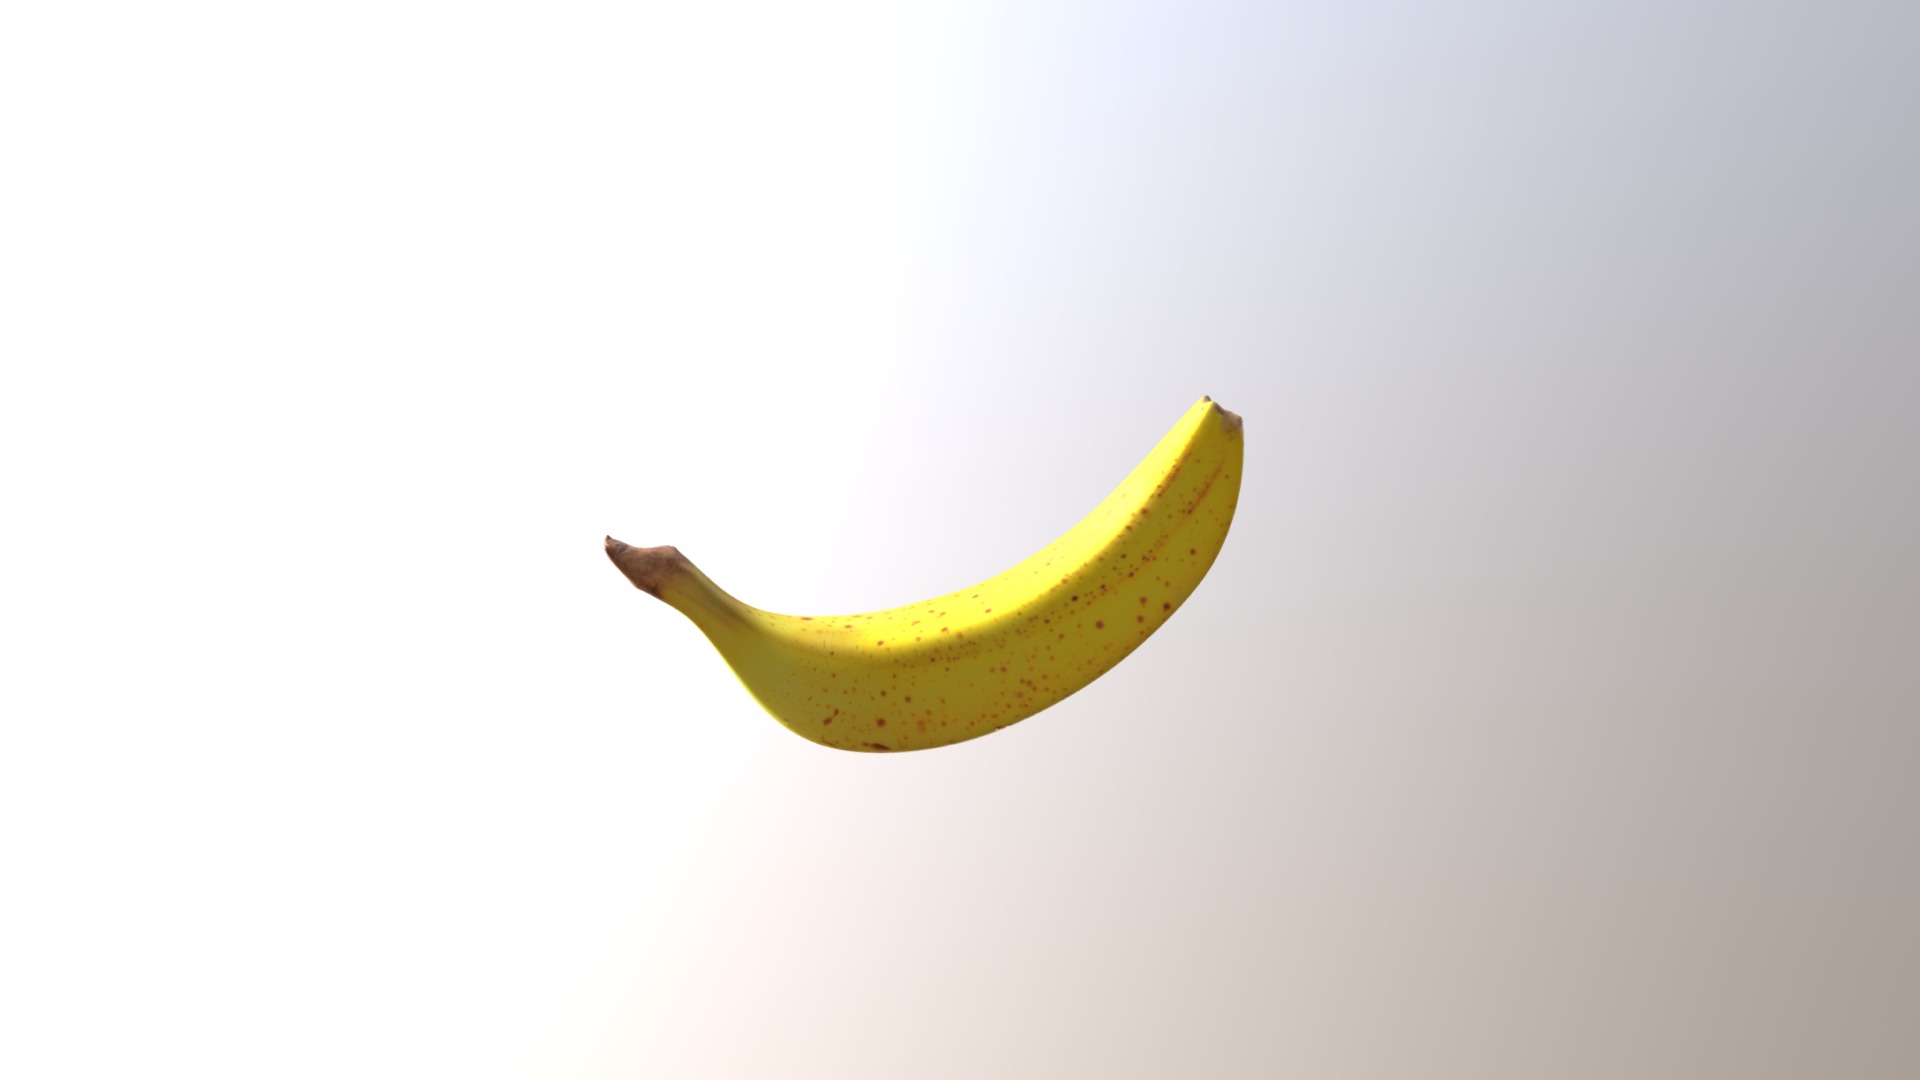 3D model BANANA - This is a 3D model of the BANANA. The 3D model is about a banana on a white background.